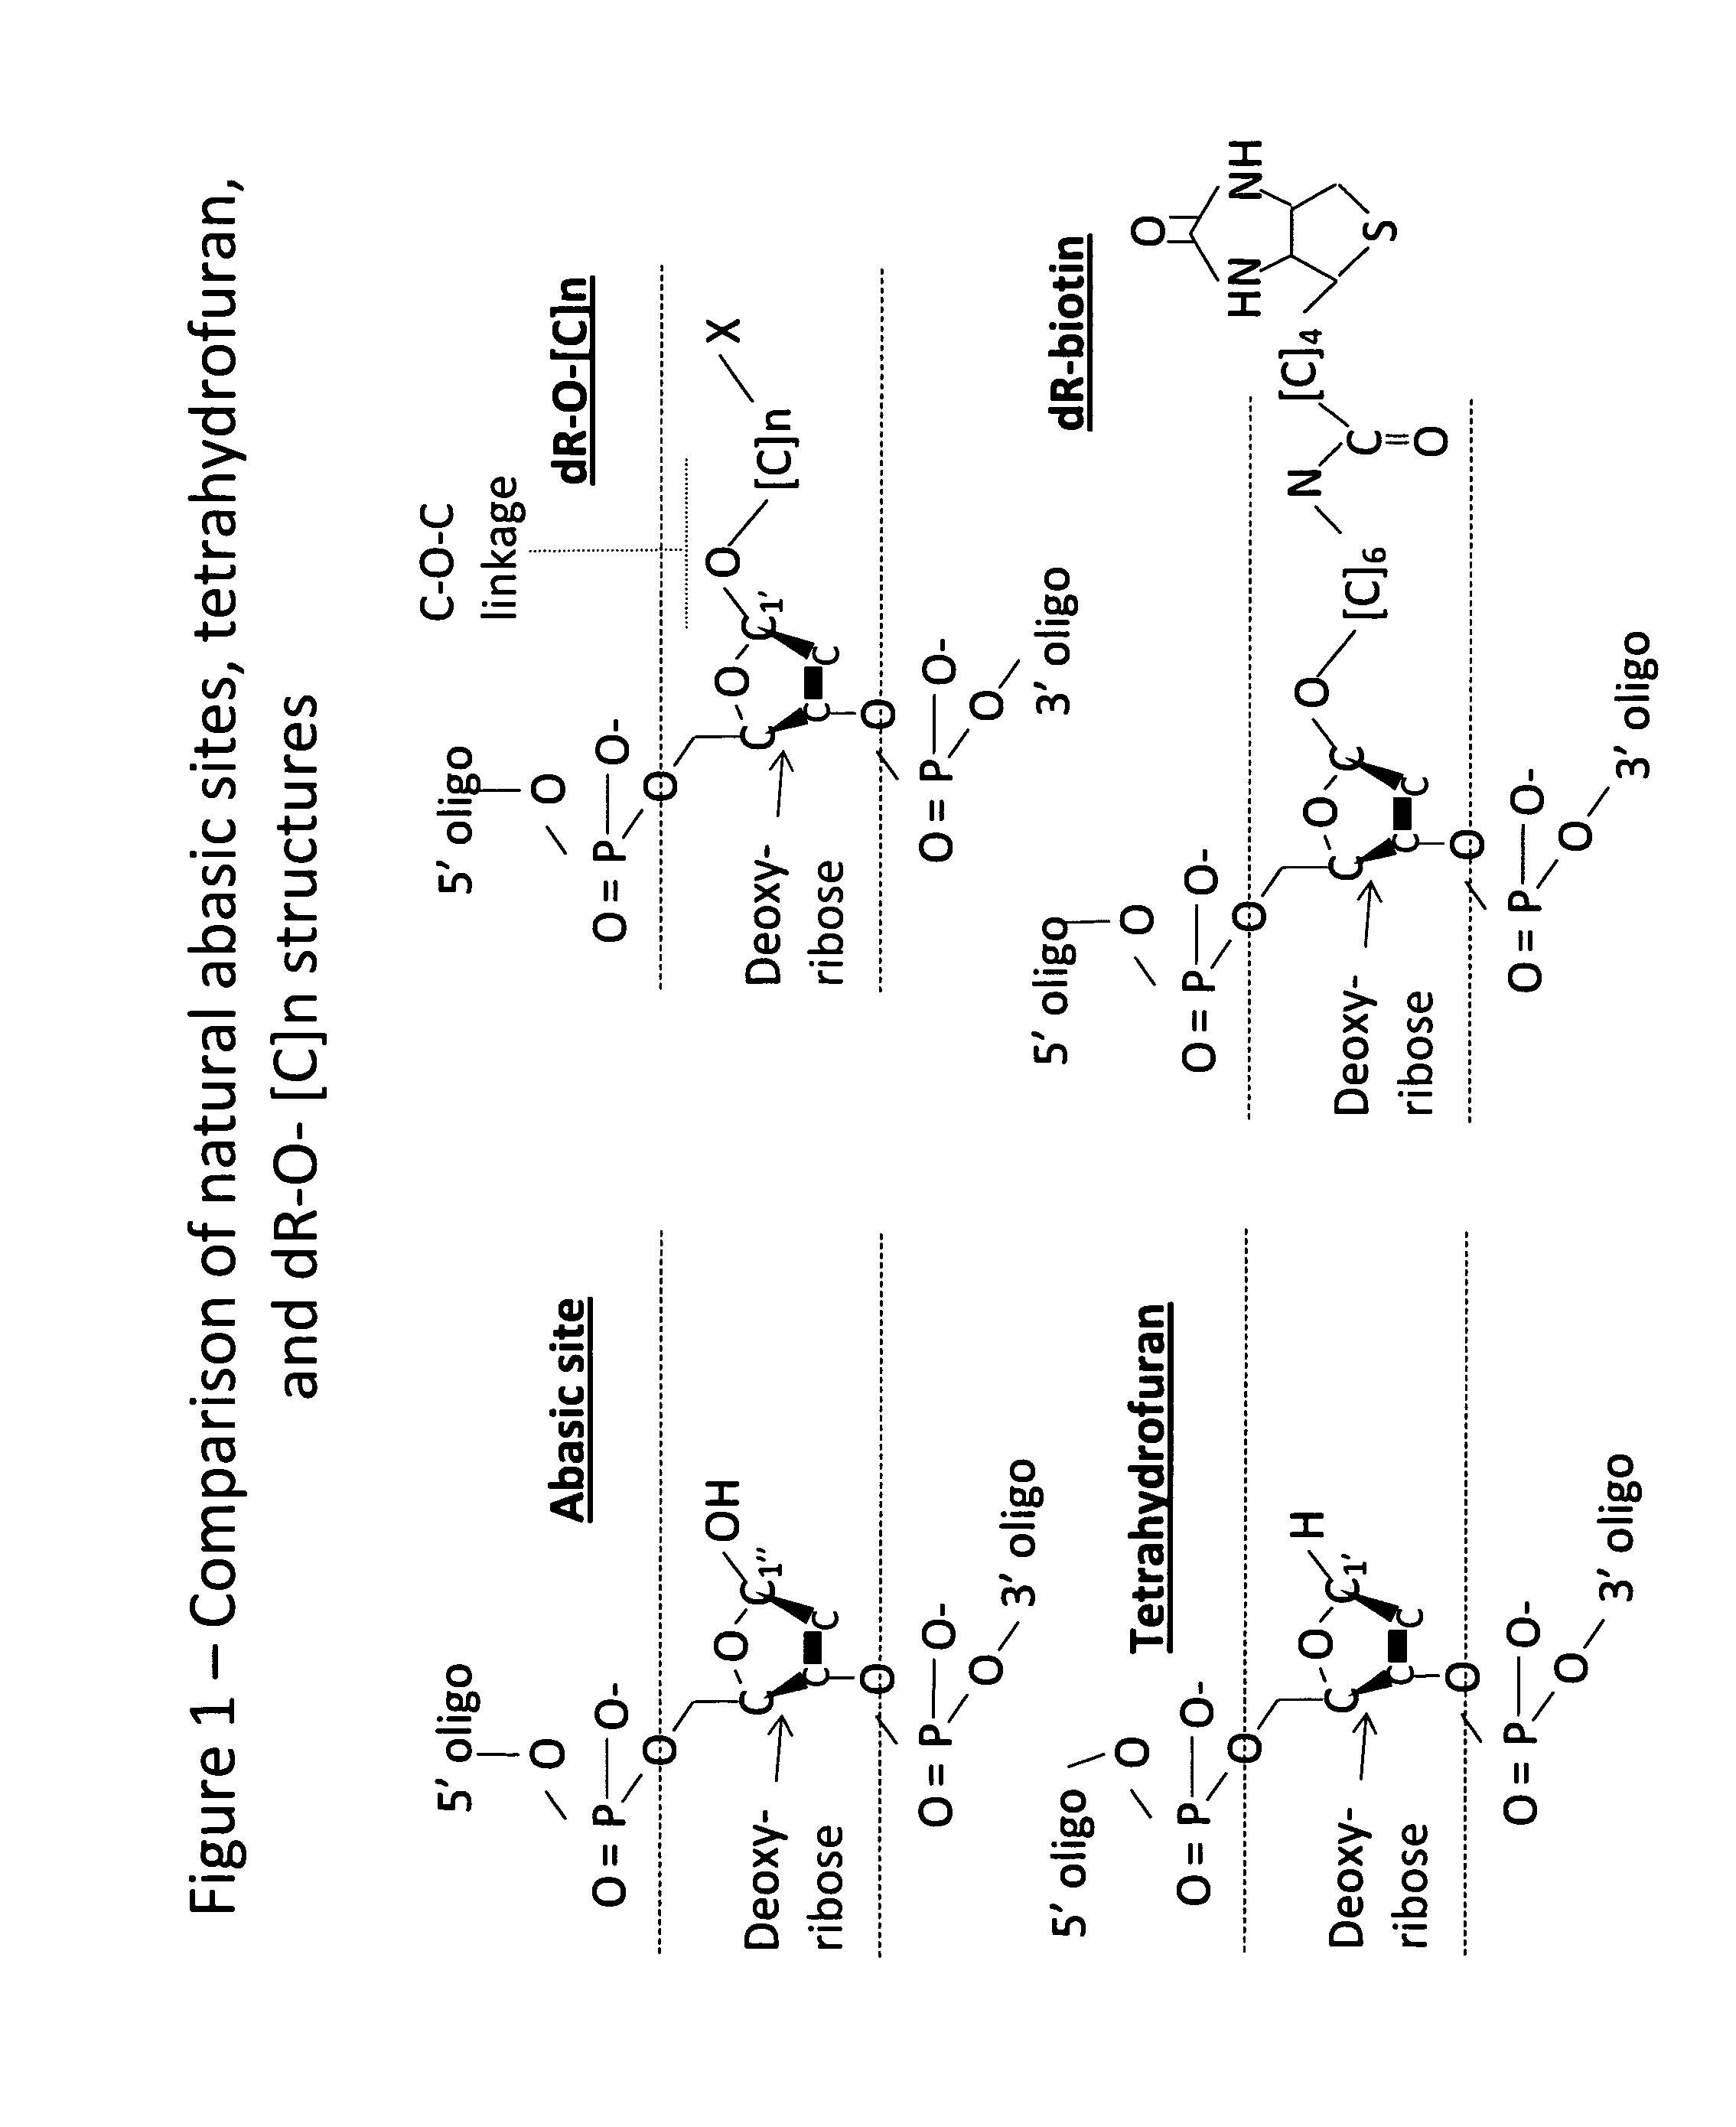 DNA Glycosylase/Lyase and AP Endonuclease substrates